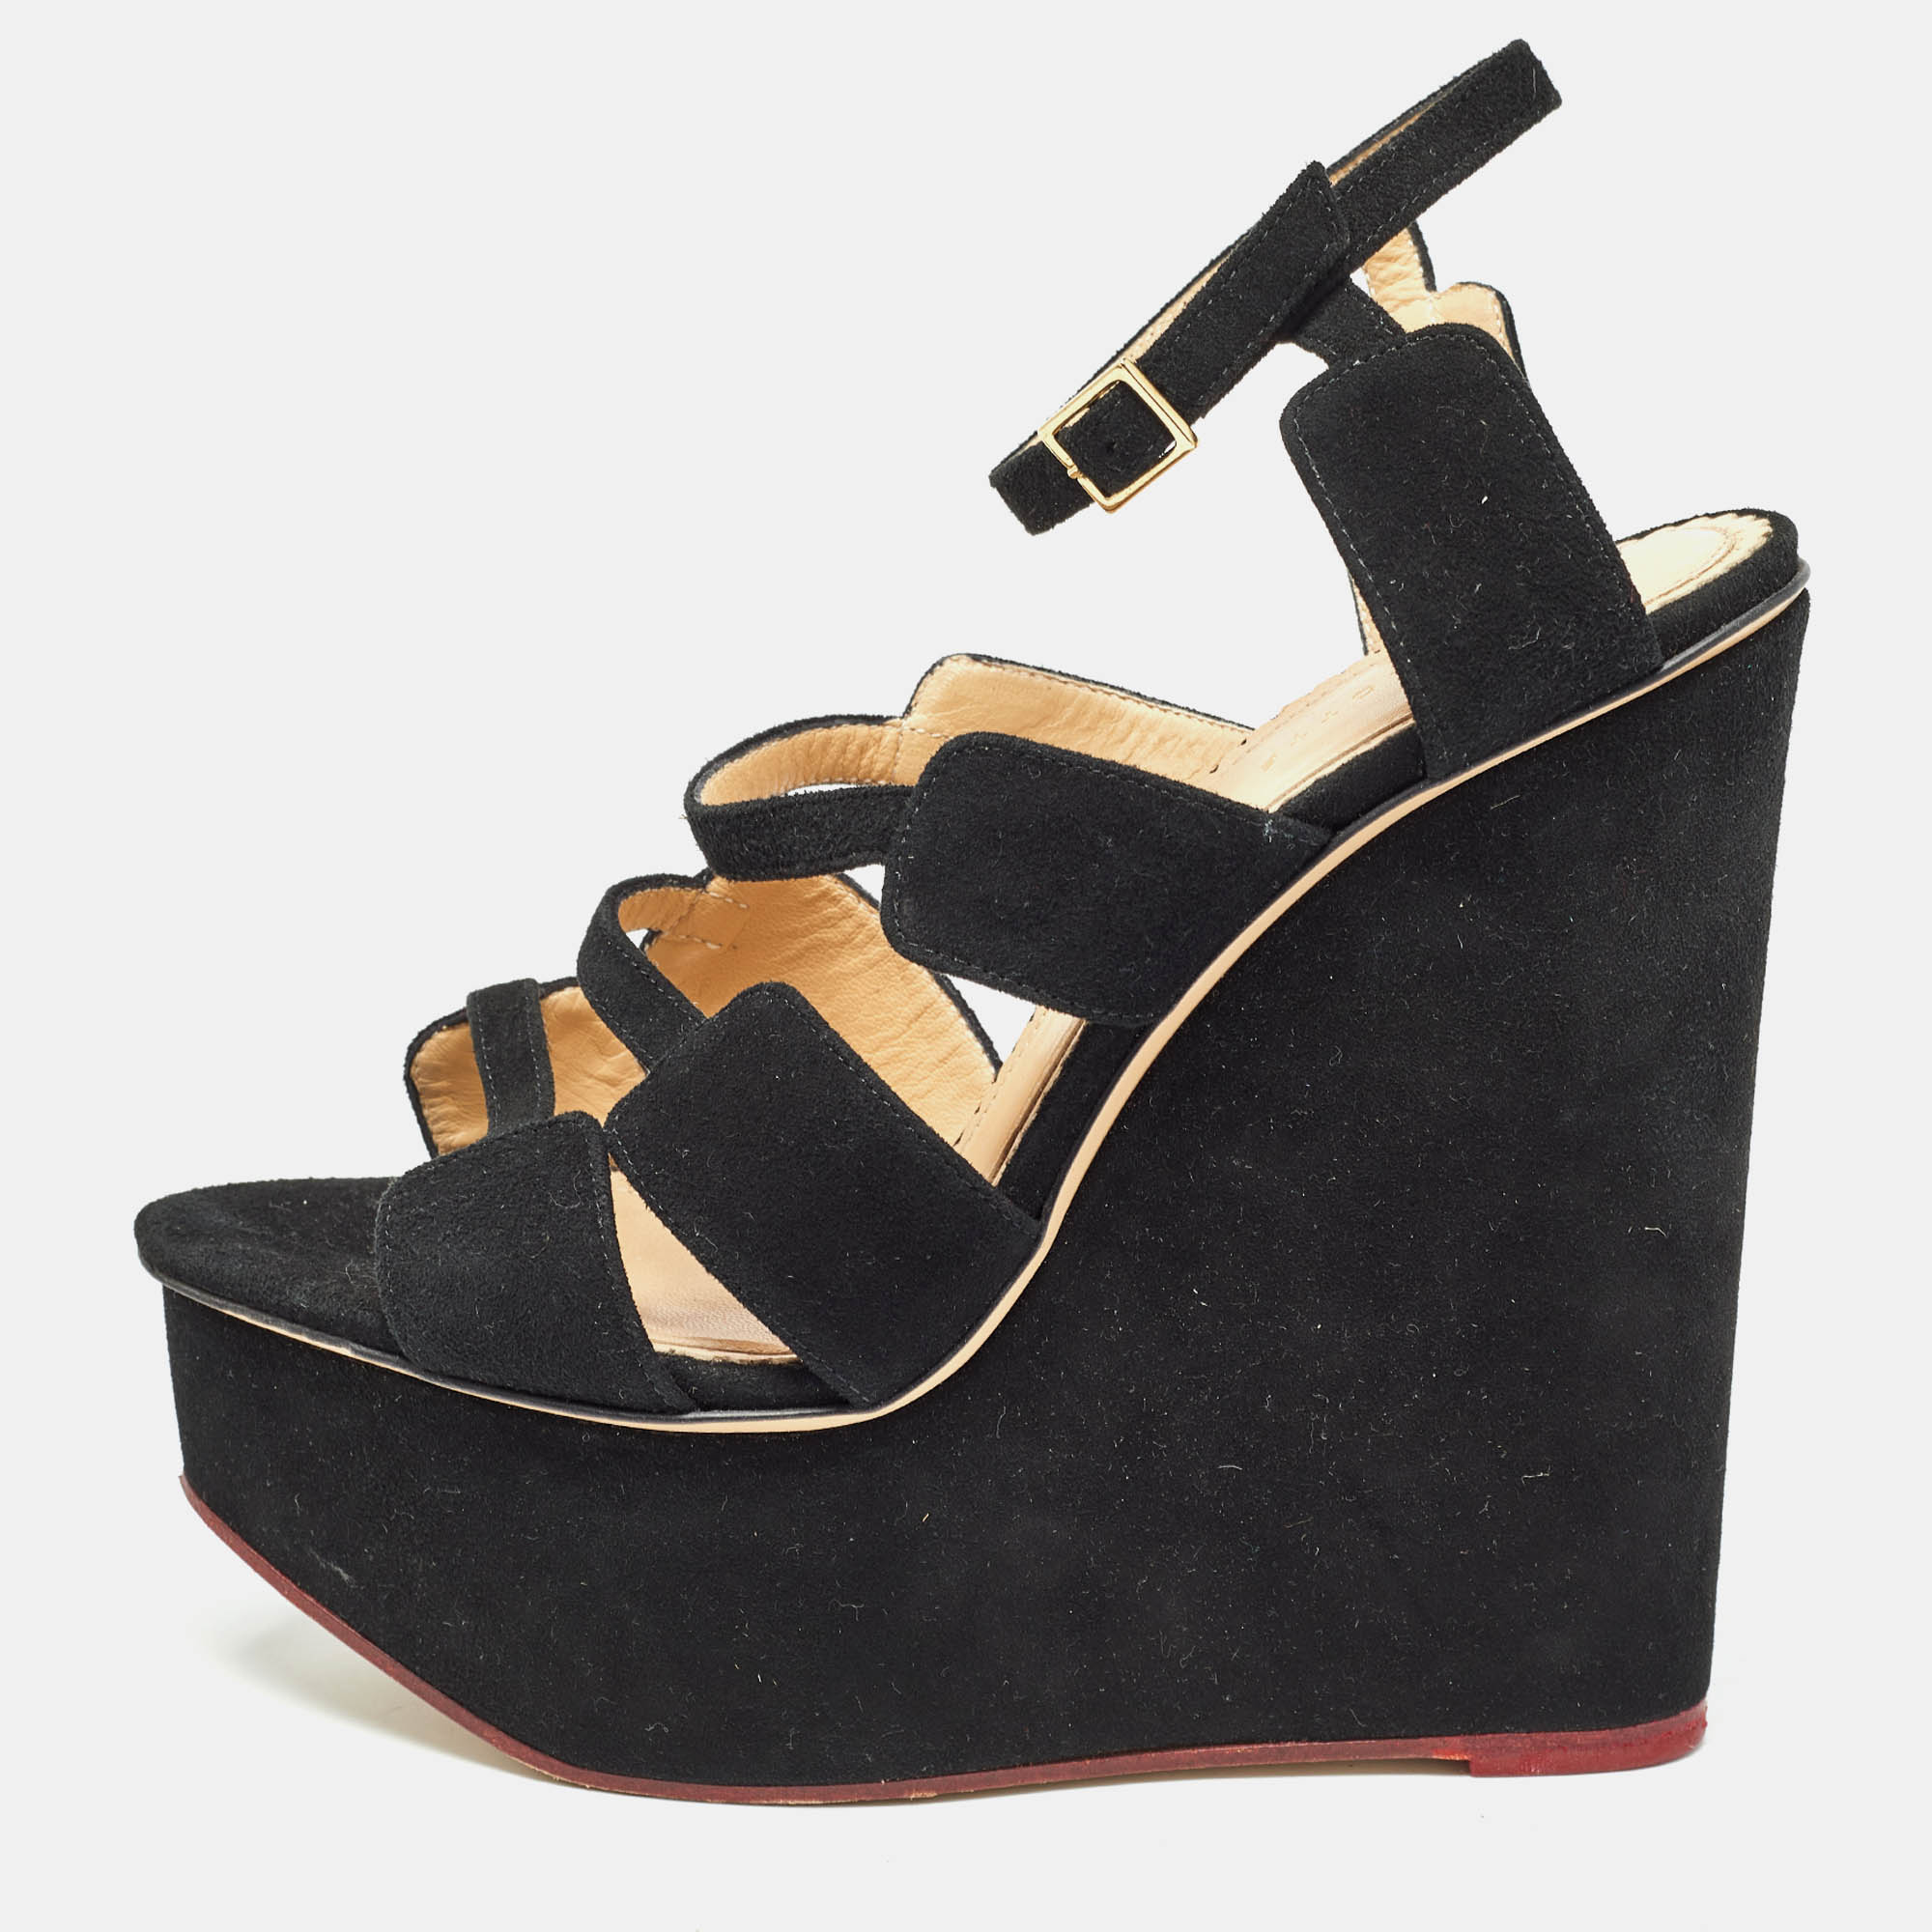 Charlotte olympia black suede platform wedge strappy sandals size 39